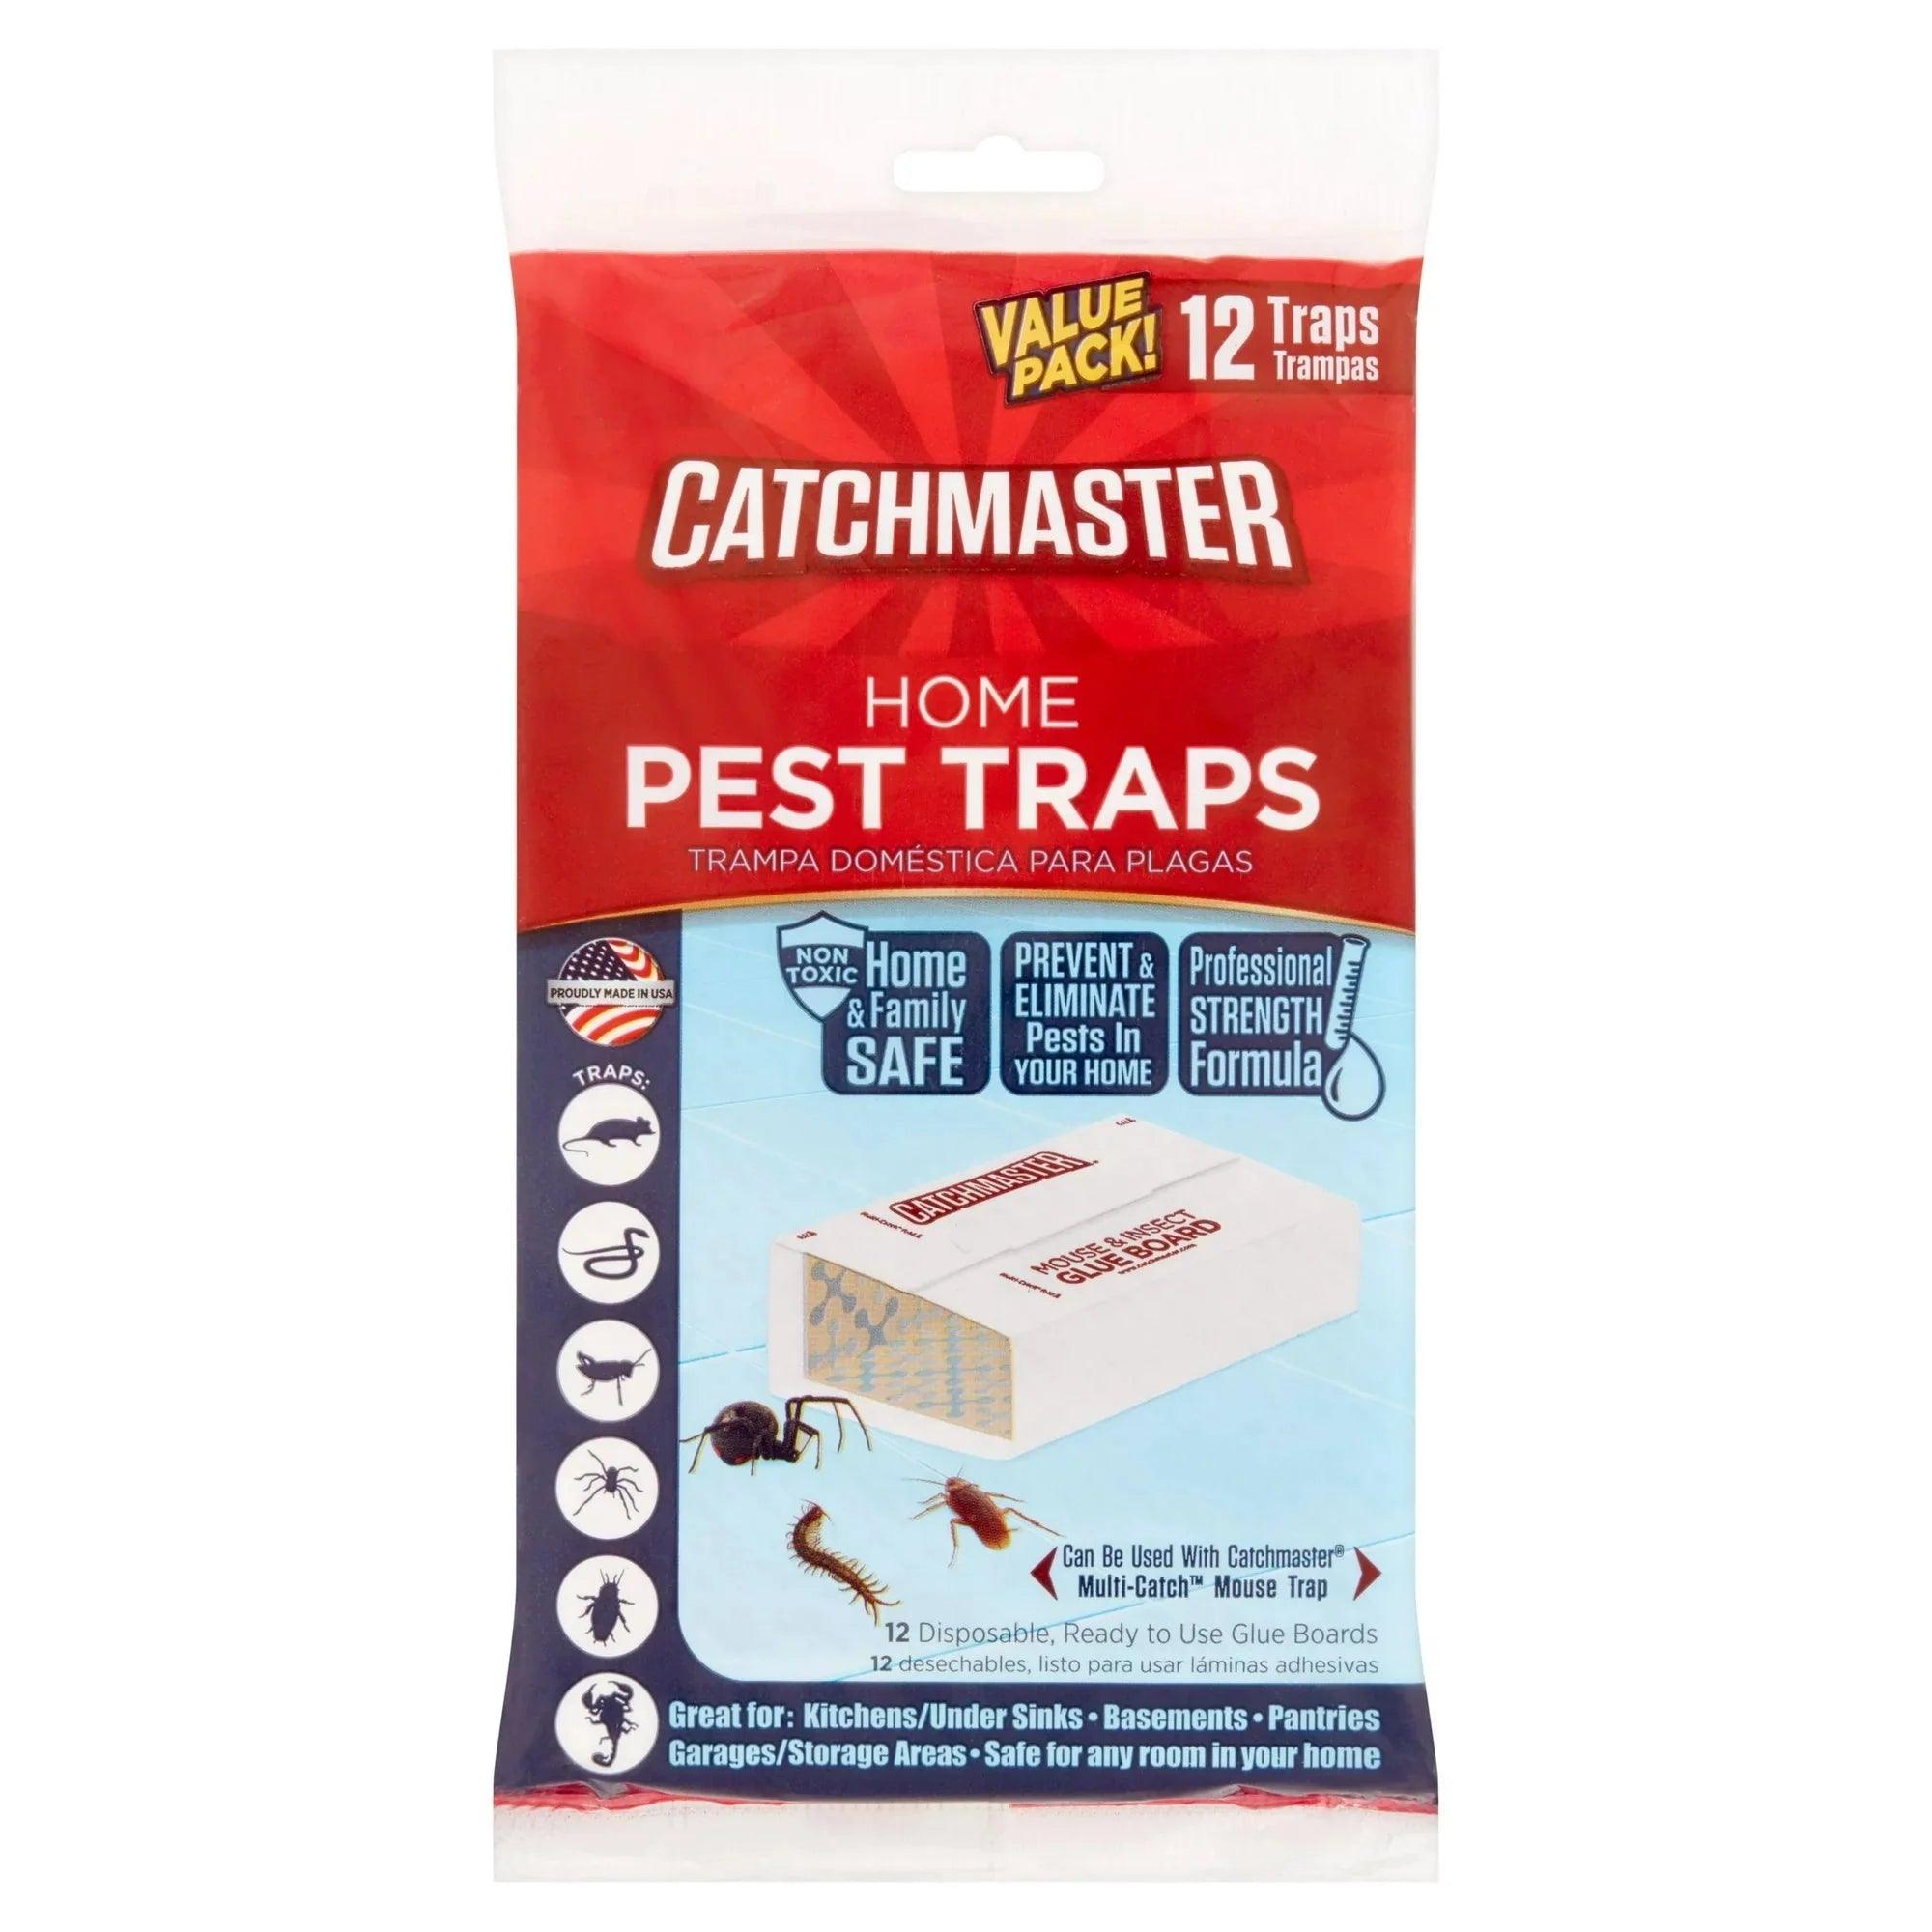 Wholesale prices with free shipping all over United States Catchmaster Value Pack Home Pest Traps 12 Count - Scented to attract pests - Economical & Easy to Use - Steven Deals